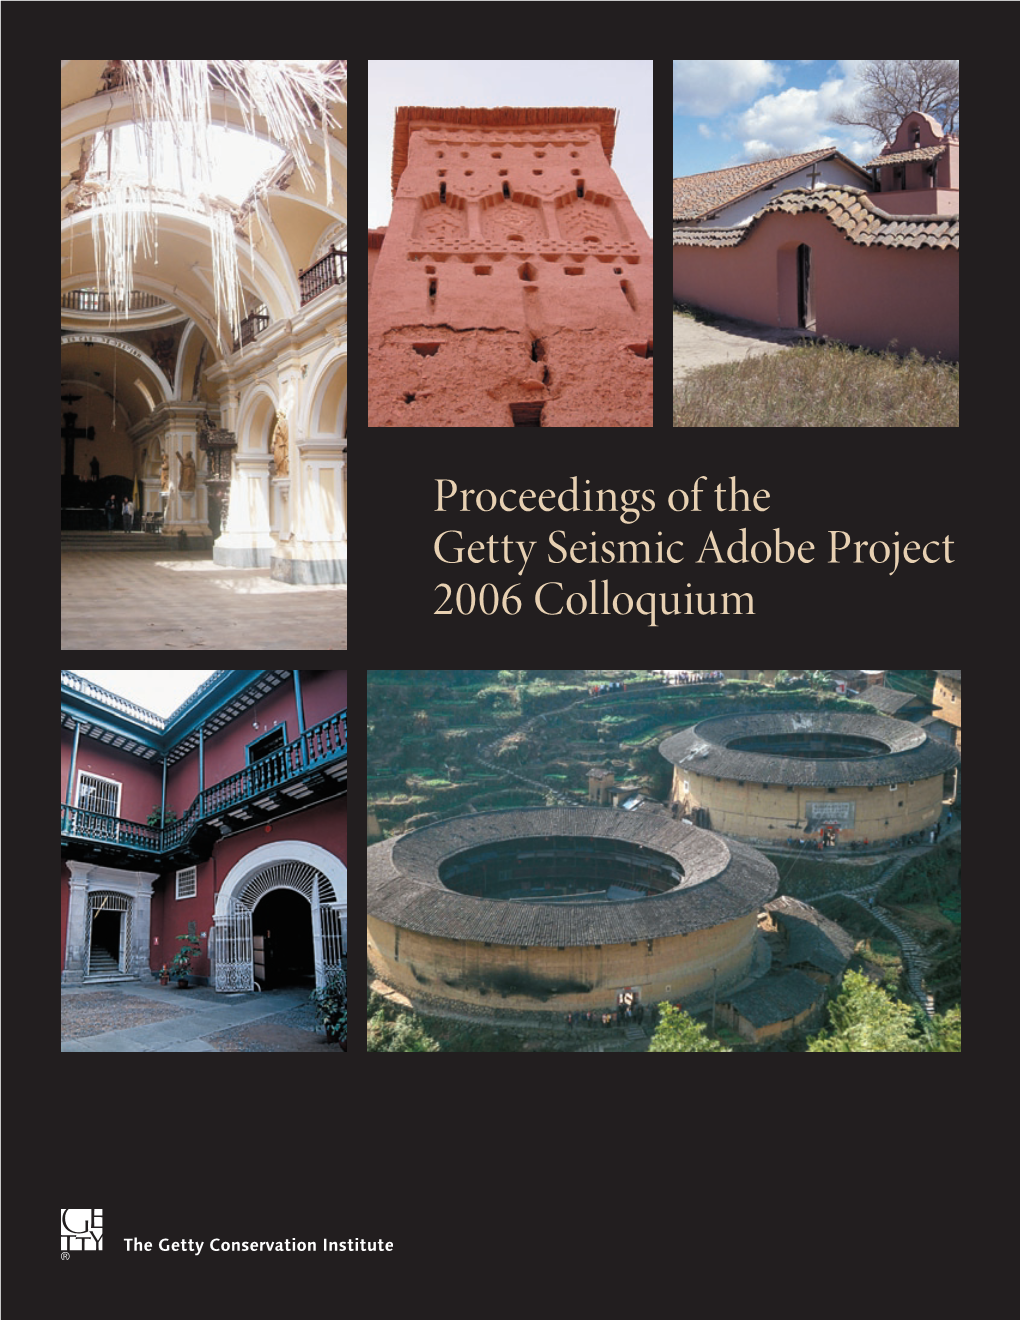 Proceedings of the Getty Seismic Adobe Project 2006 Colloquium Proceedings of the Getty Seismic Adobe Project 2006 Colloquium